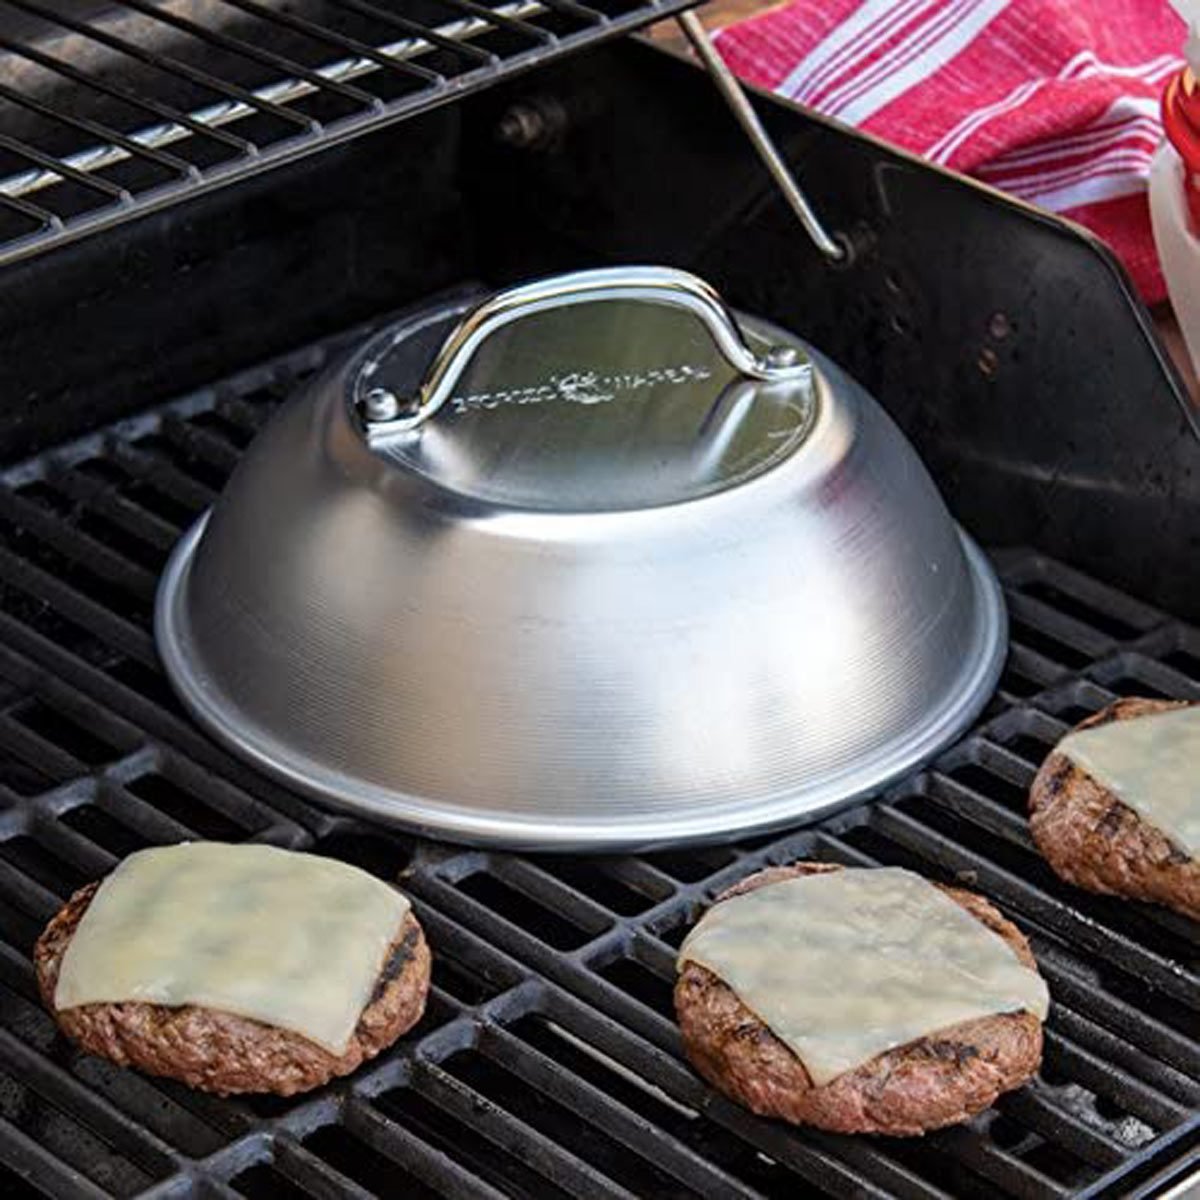 10 of the Best-Reviewed Grilling Essentials on Amazon